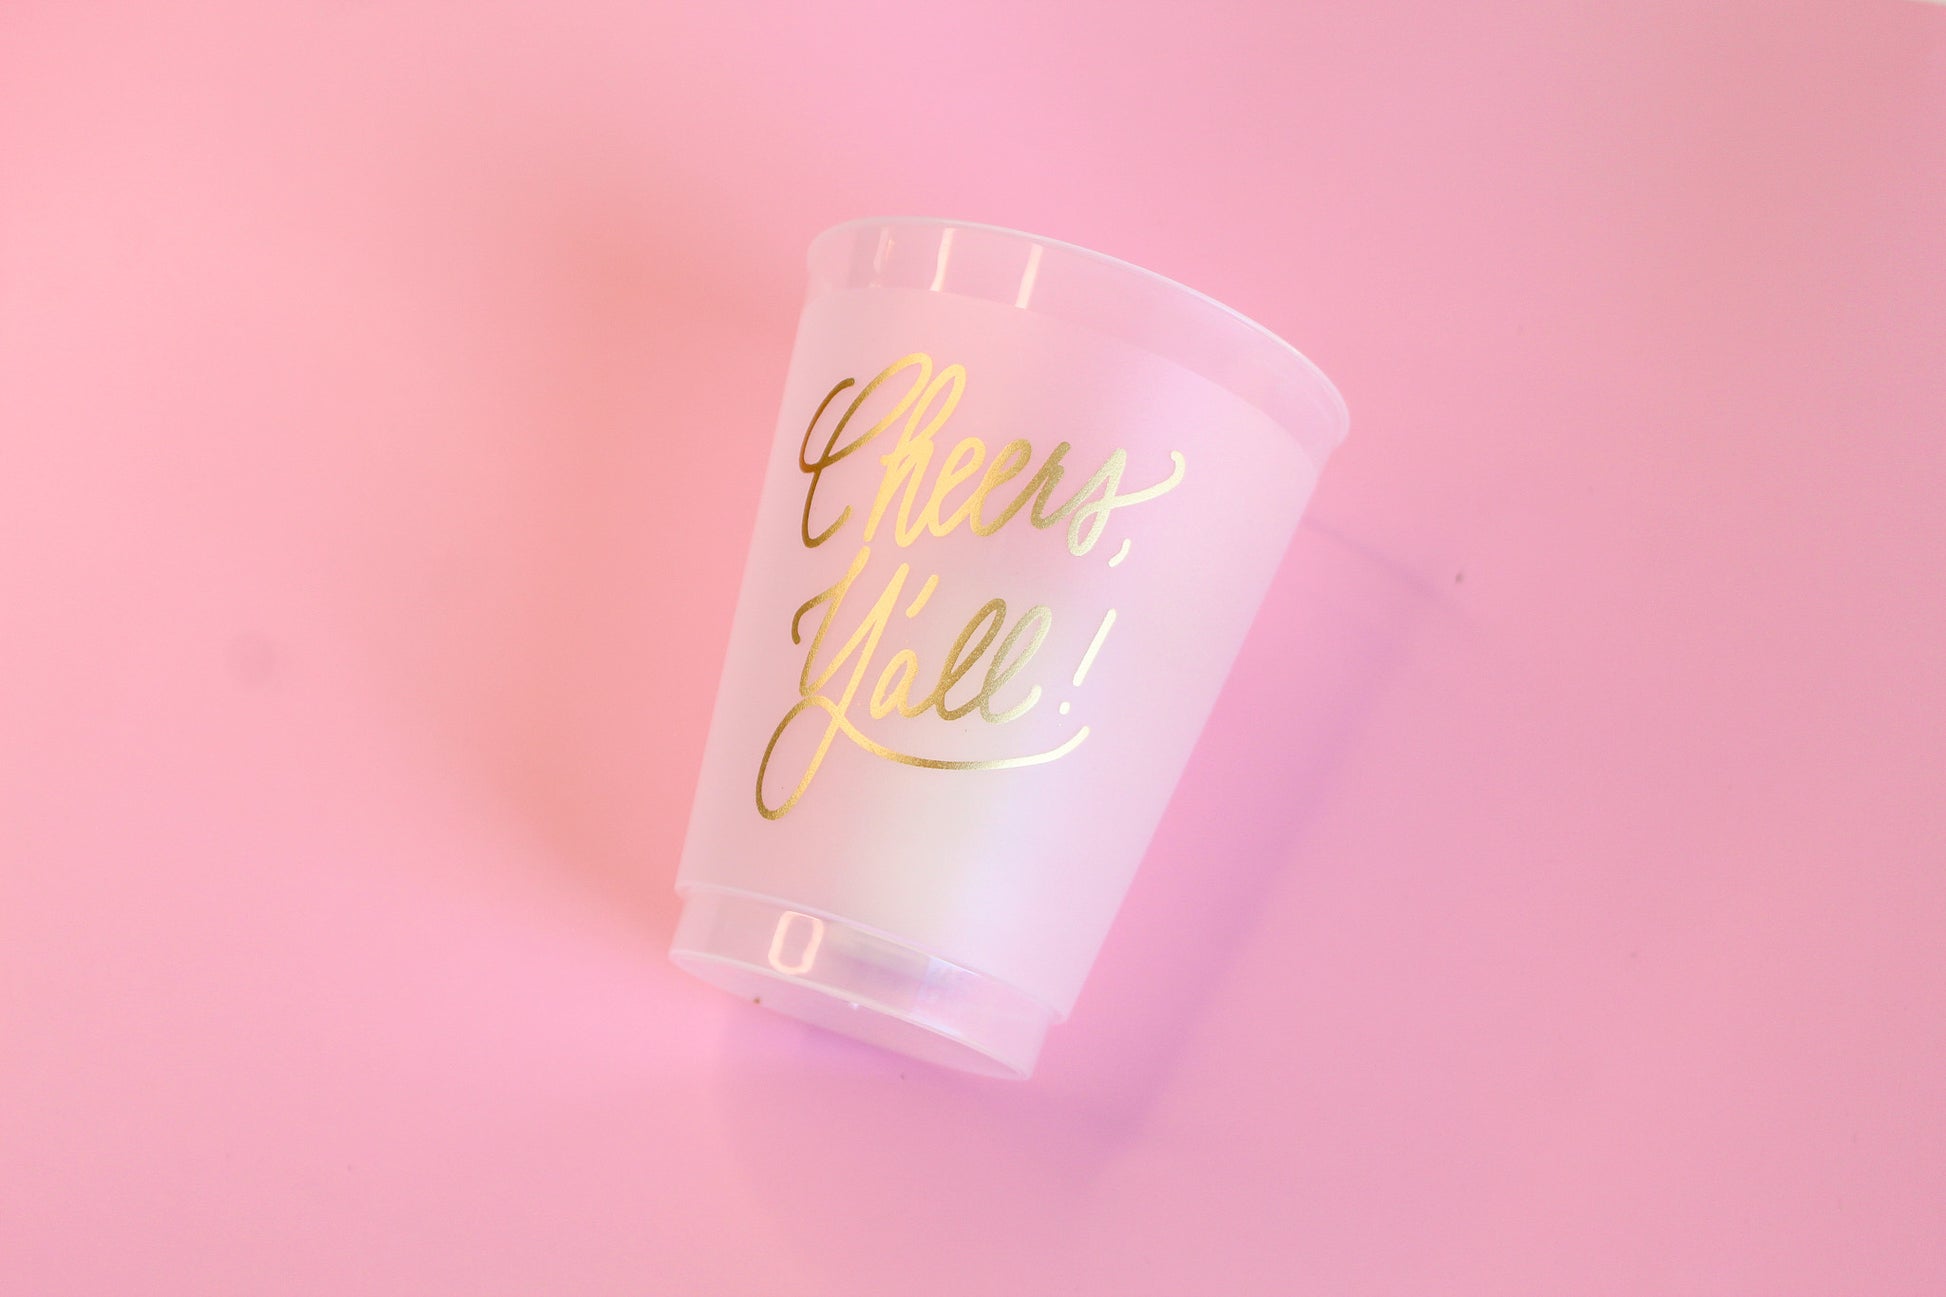 'Cheers Y'all' party cups